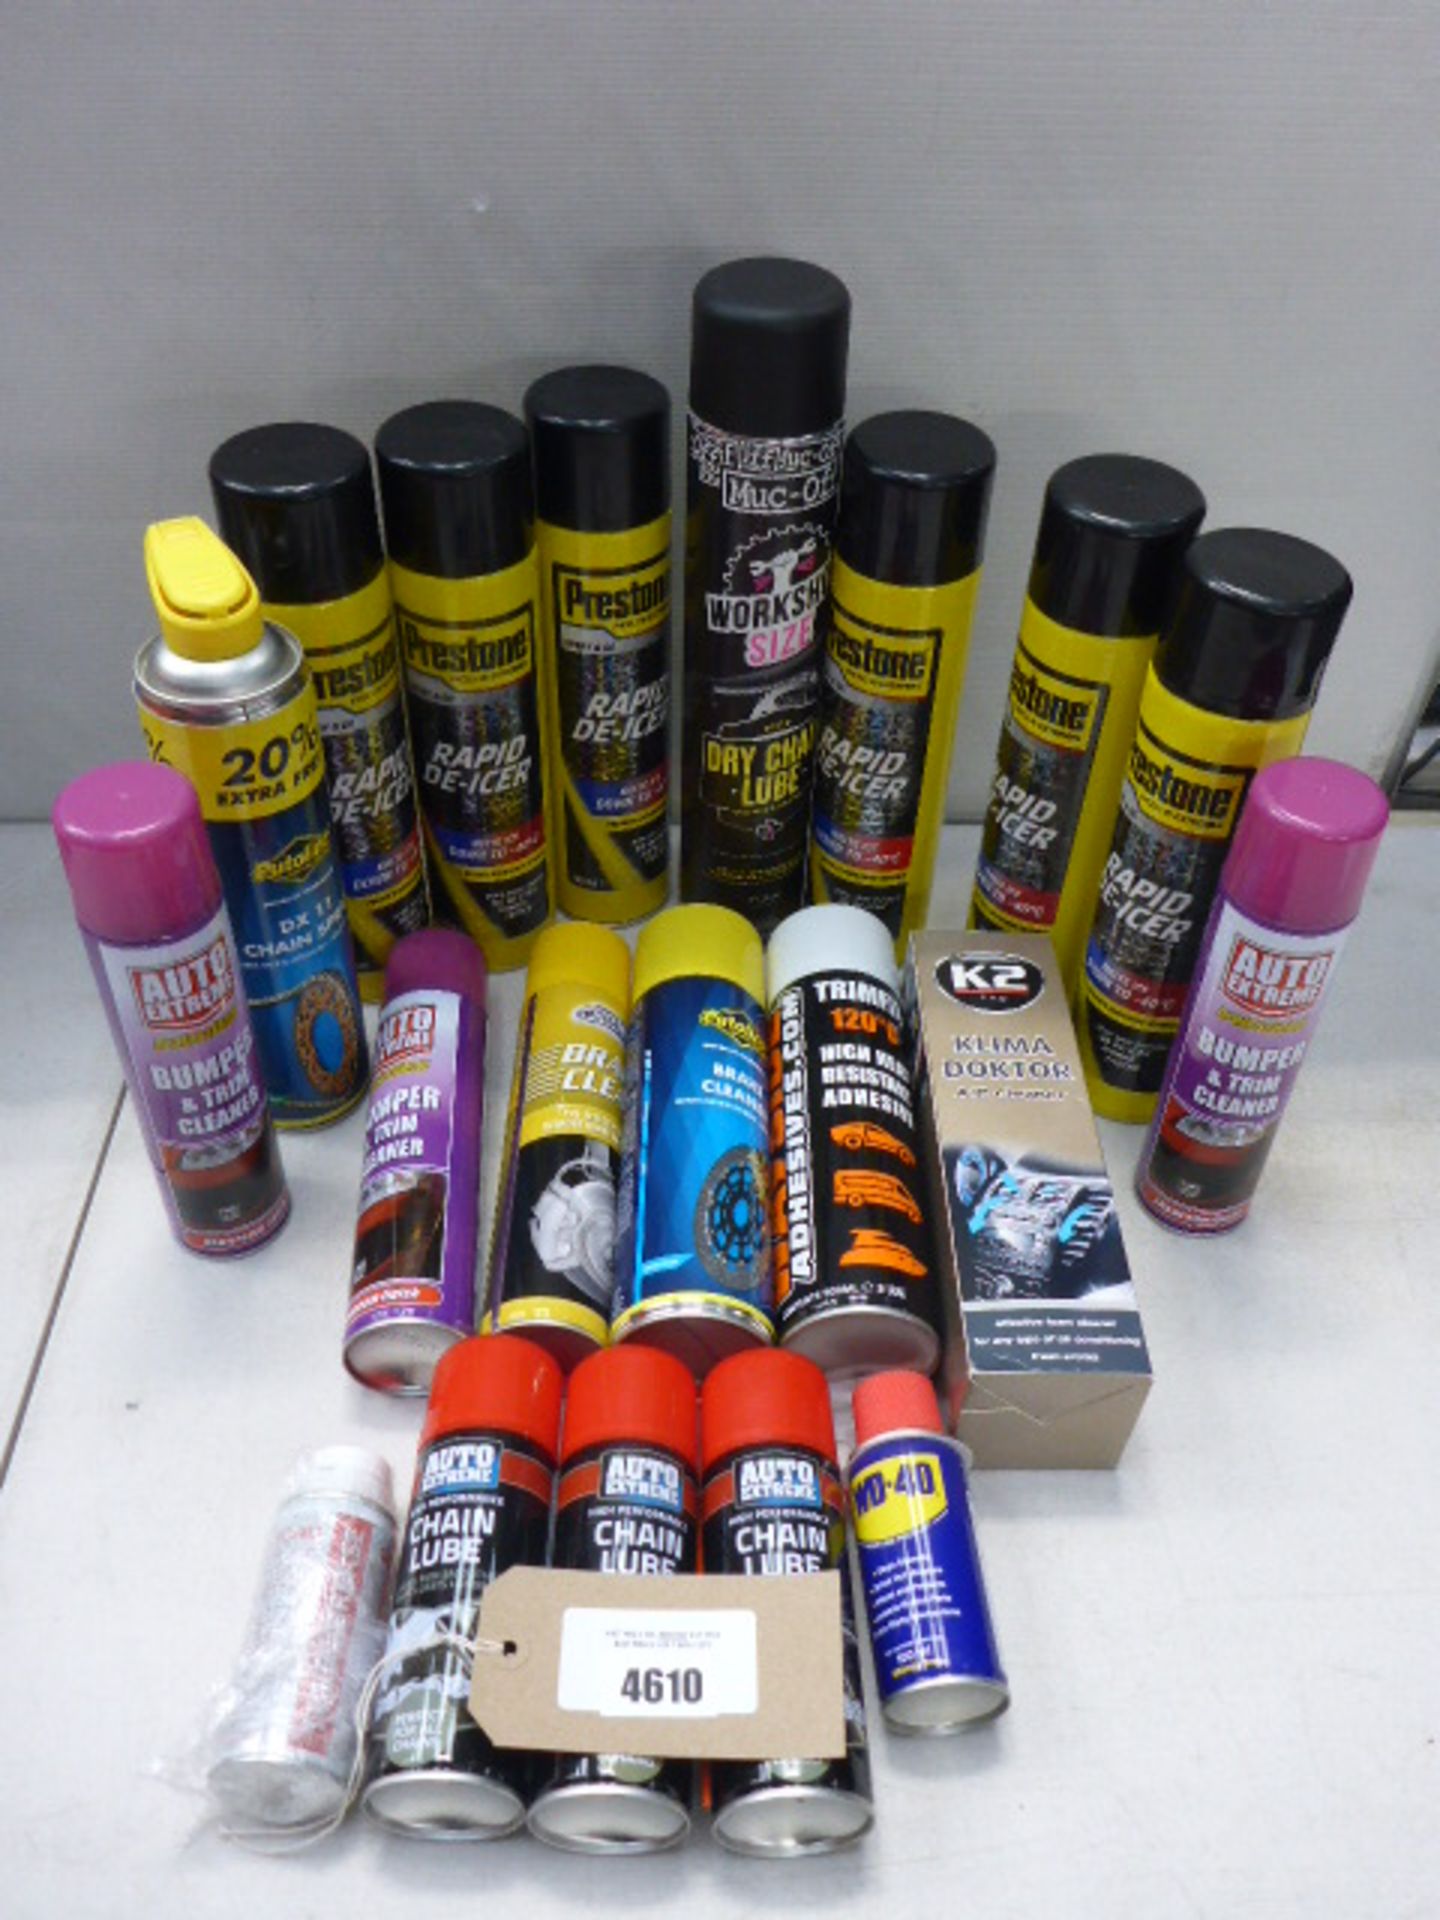 Bag containing chain lube, bumper spray, high heat resistant adhesive, de-icer, air conditioning